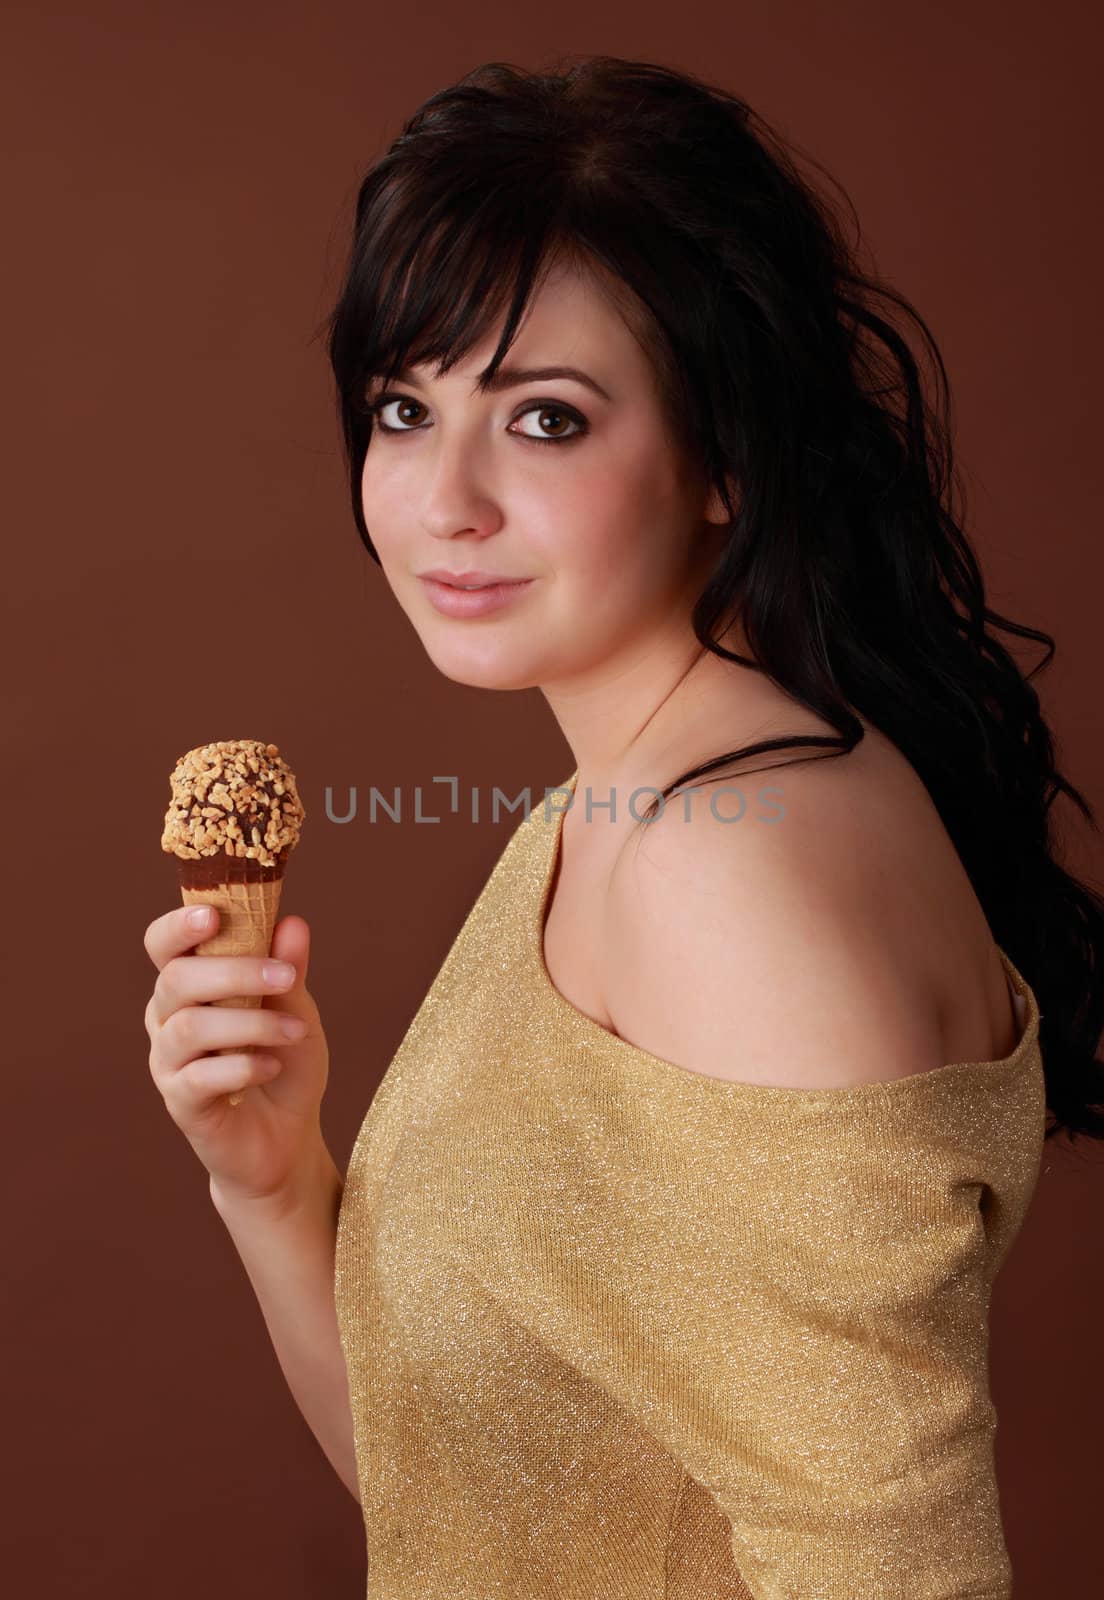 young caucasian woman with ice cream cone